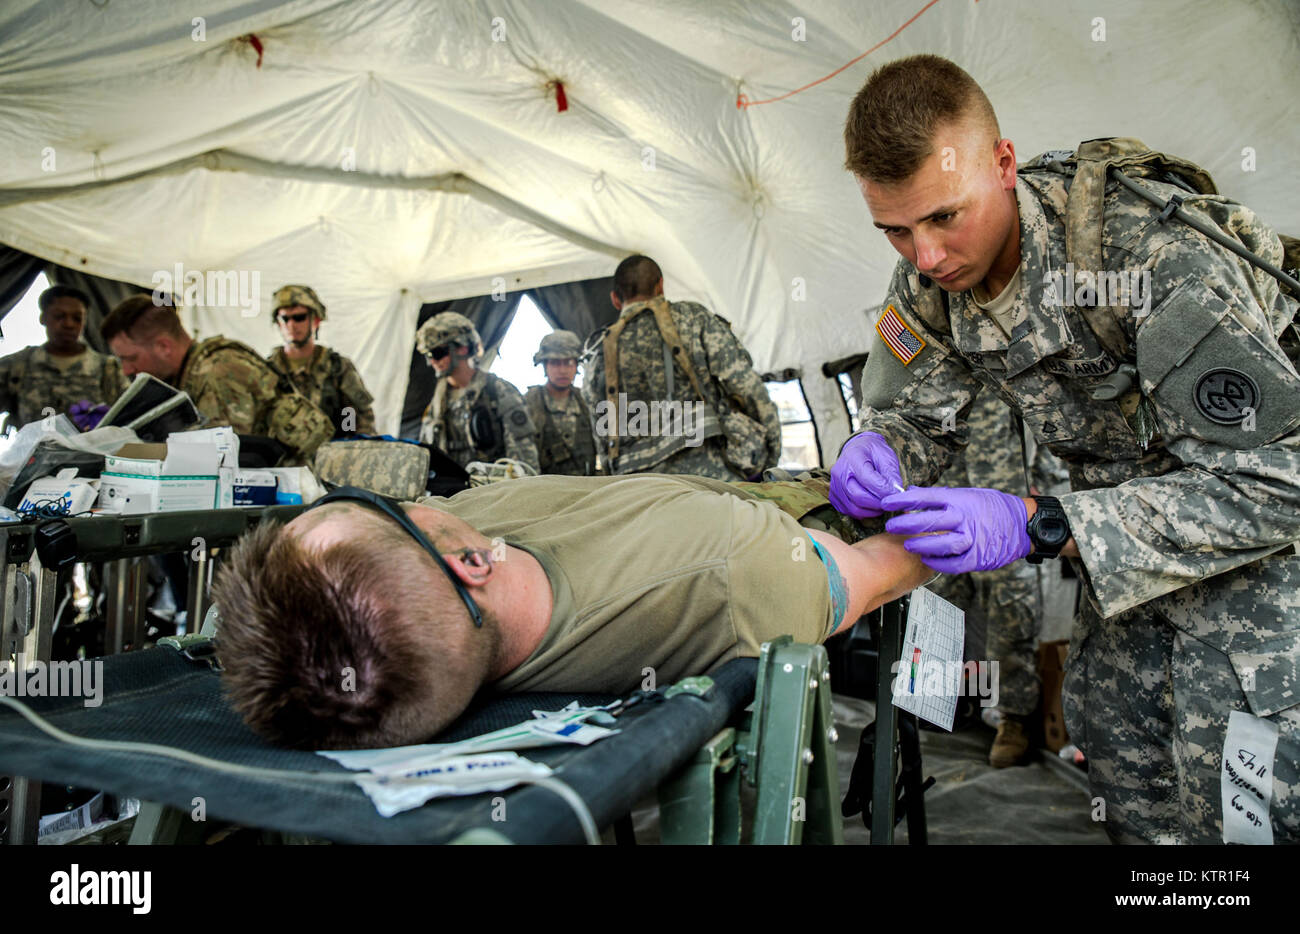 New York Army National Guard Pfc. Beau Fisher, assigned to Headquarters Co., 1st Battalion, 69th Infantry administers IV fluids to a Soldier during a mass casualty exercise at the Army’s Joint Readiness Training Center, Fort Polk, La., Saturday, July 16, 2016. More than 3,000 New York Army National Guard Soldiers deployed for a three week exercise at the Army’s Joint Readiness Training Center, July 9-30, 2016. U.S. Army National Guard photo by Sgt. Harley Jelis. Stock Photo